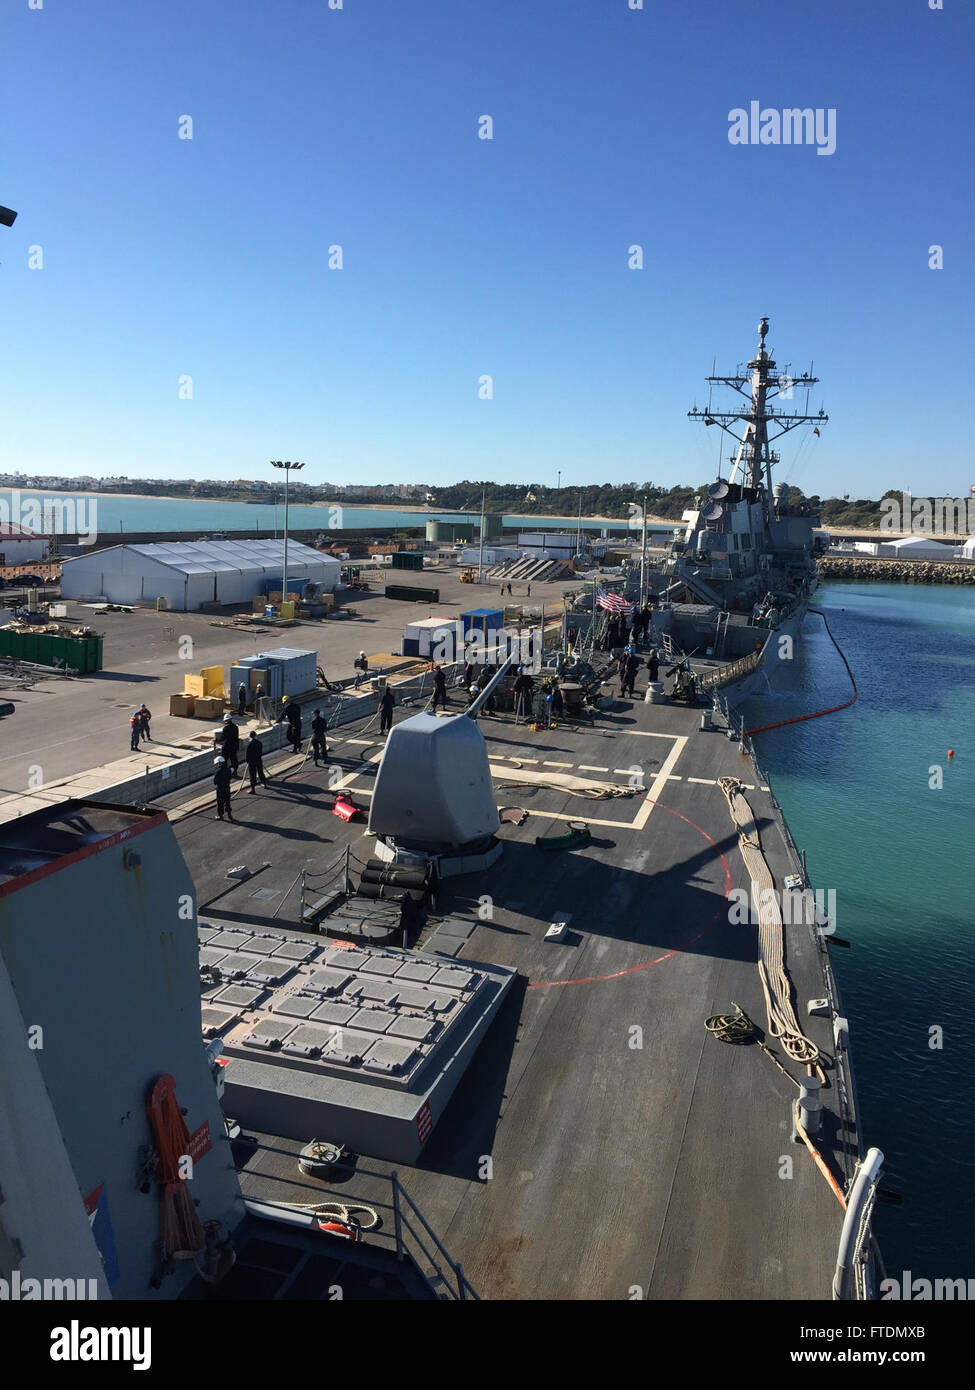 160229-N-YN258-002 ROTA, Spain (Feb. 29, 2016) USS Porter (DDG 78) pulls into port Feb. 29, 2016. Porter, an Arleigh Burke-class guided missile destroyer, forward-deployed to Rota, Spain, is preparing for deployment in the U.S. 6th Fleet area of operations in support of U.S. national security interests in Europe. (U.S. Navy photo by Lt.j.g Laura Adams/Released) Stock Photo